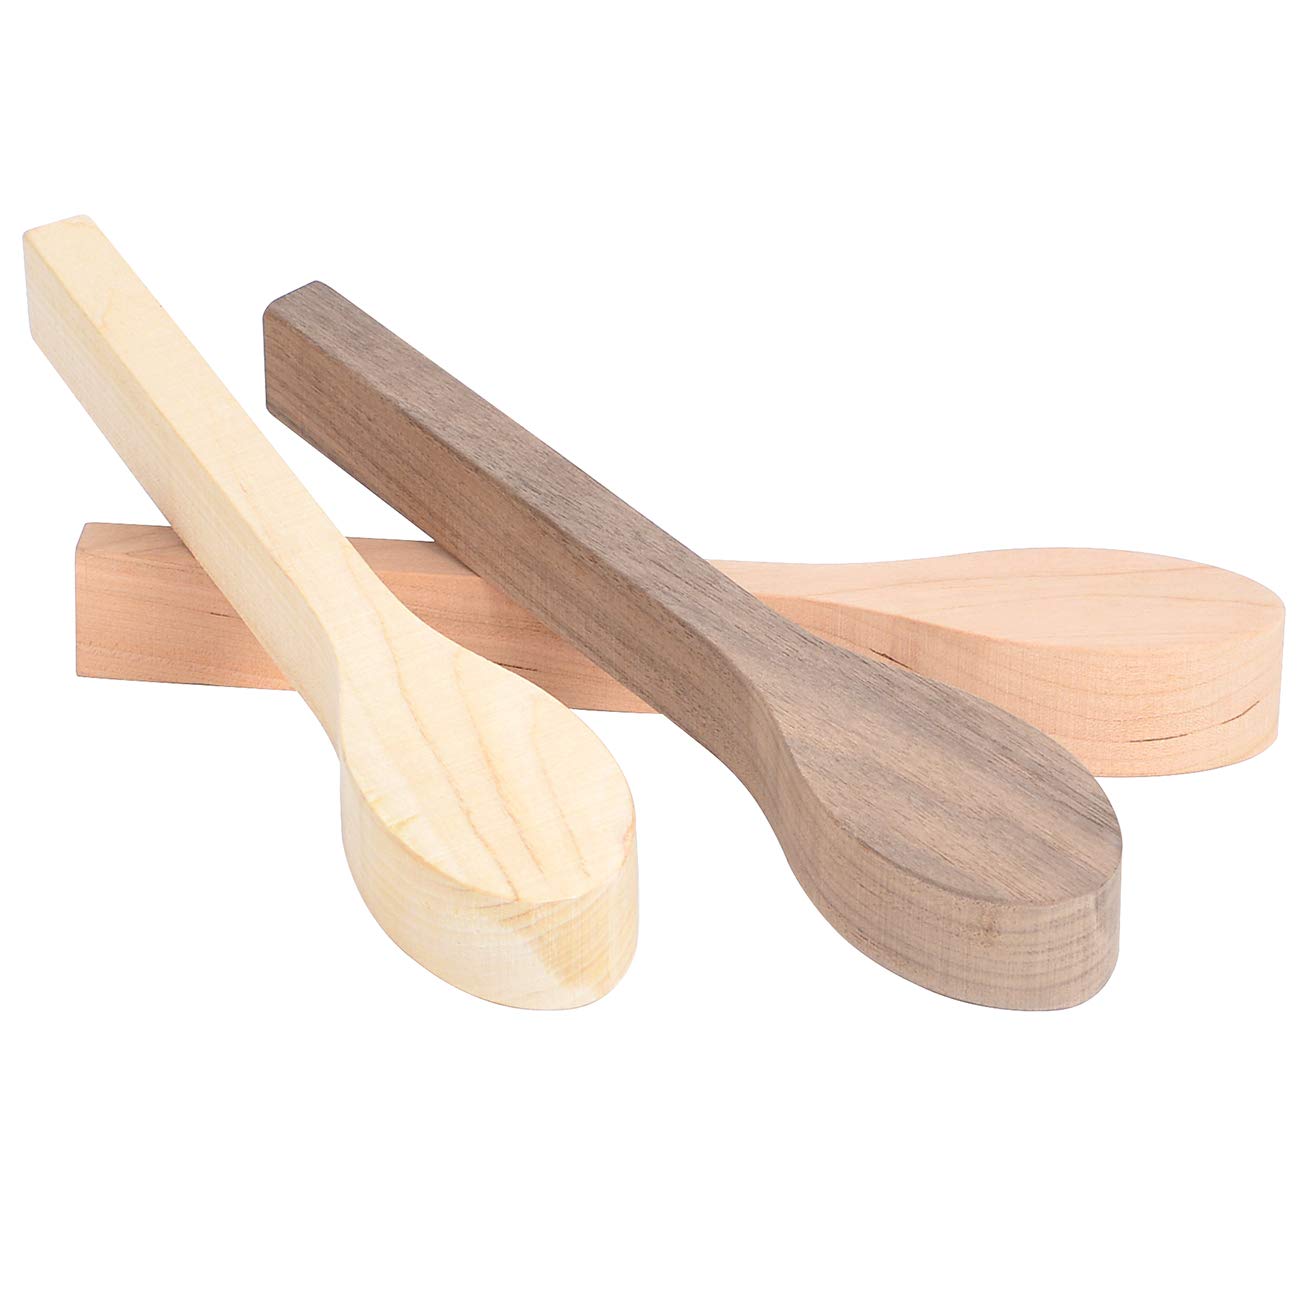 Book Cover 3Pcs Wood Carving Spoon Blank Unfinished Wooden Craft Whittling Kit for Whittler Starter Kids,Basswood +Walnut +Cherry 3 Wood